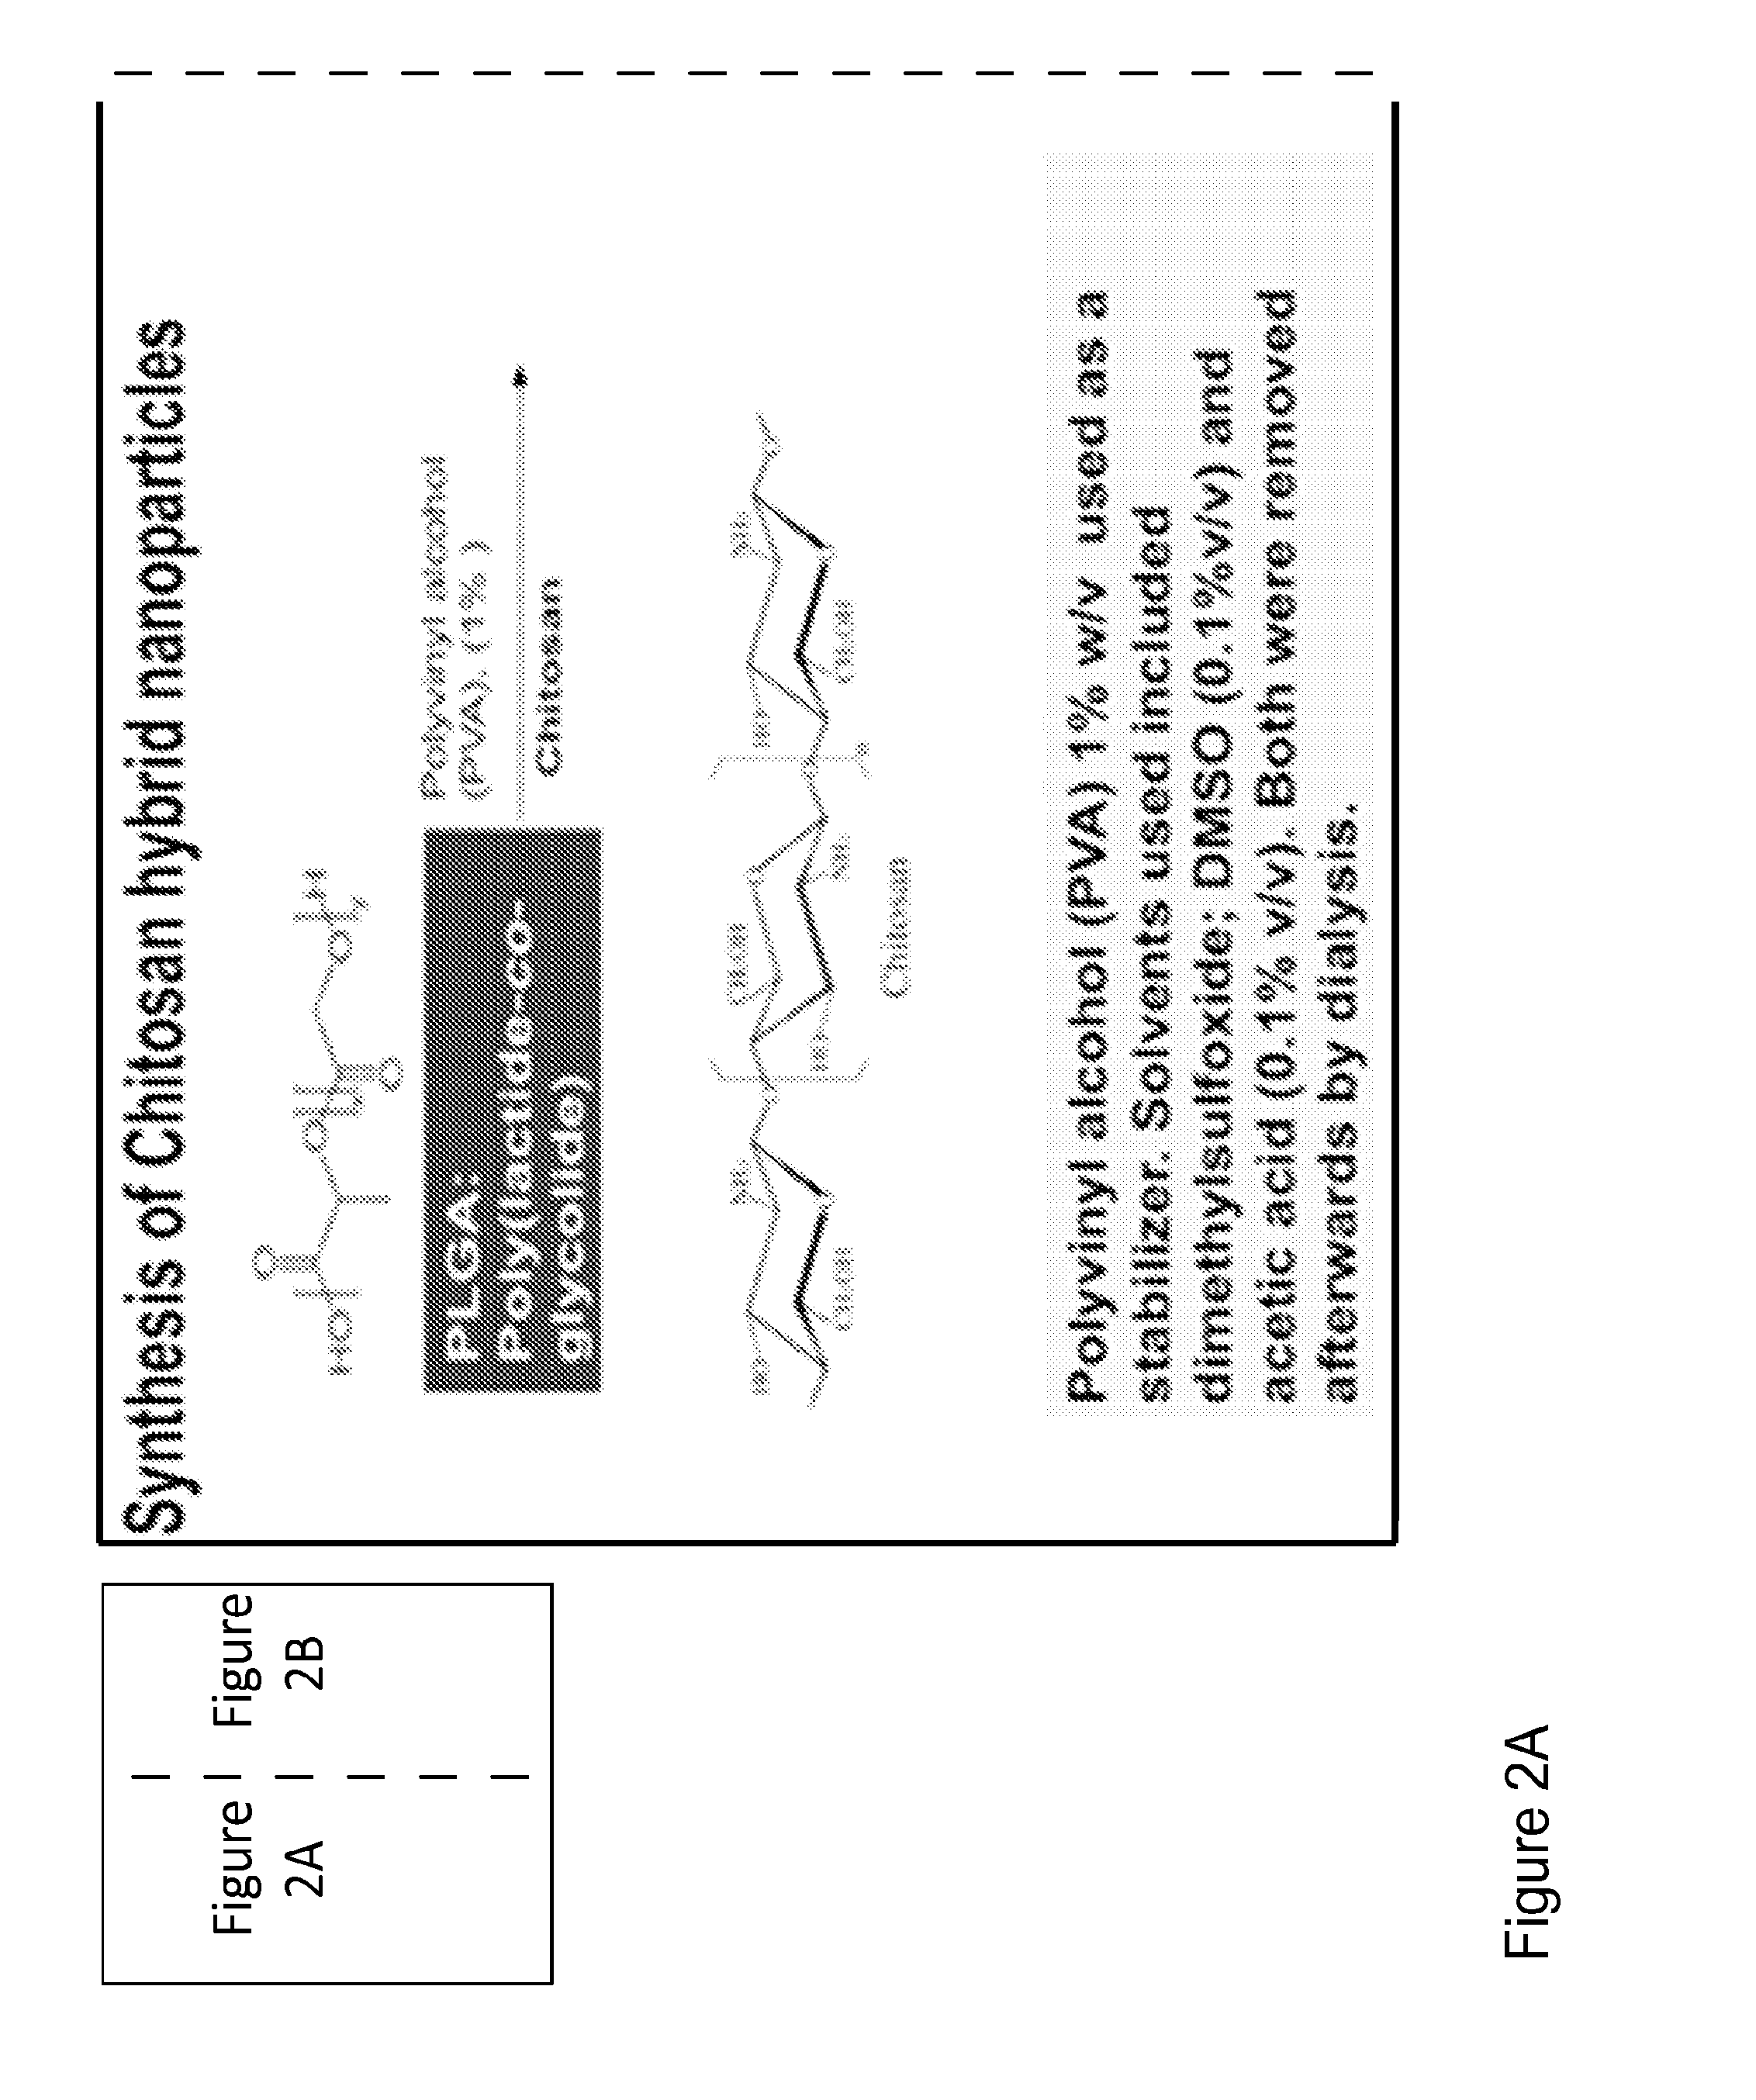 Novel hemostatic patch and uses thereof